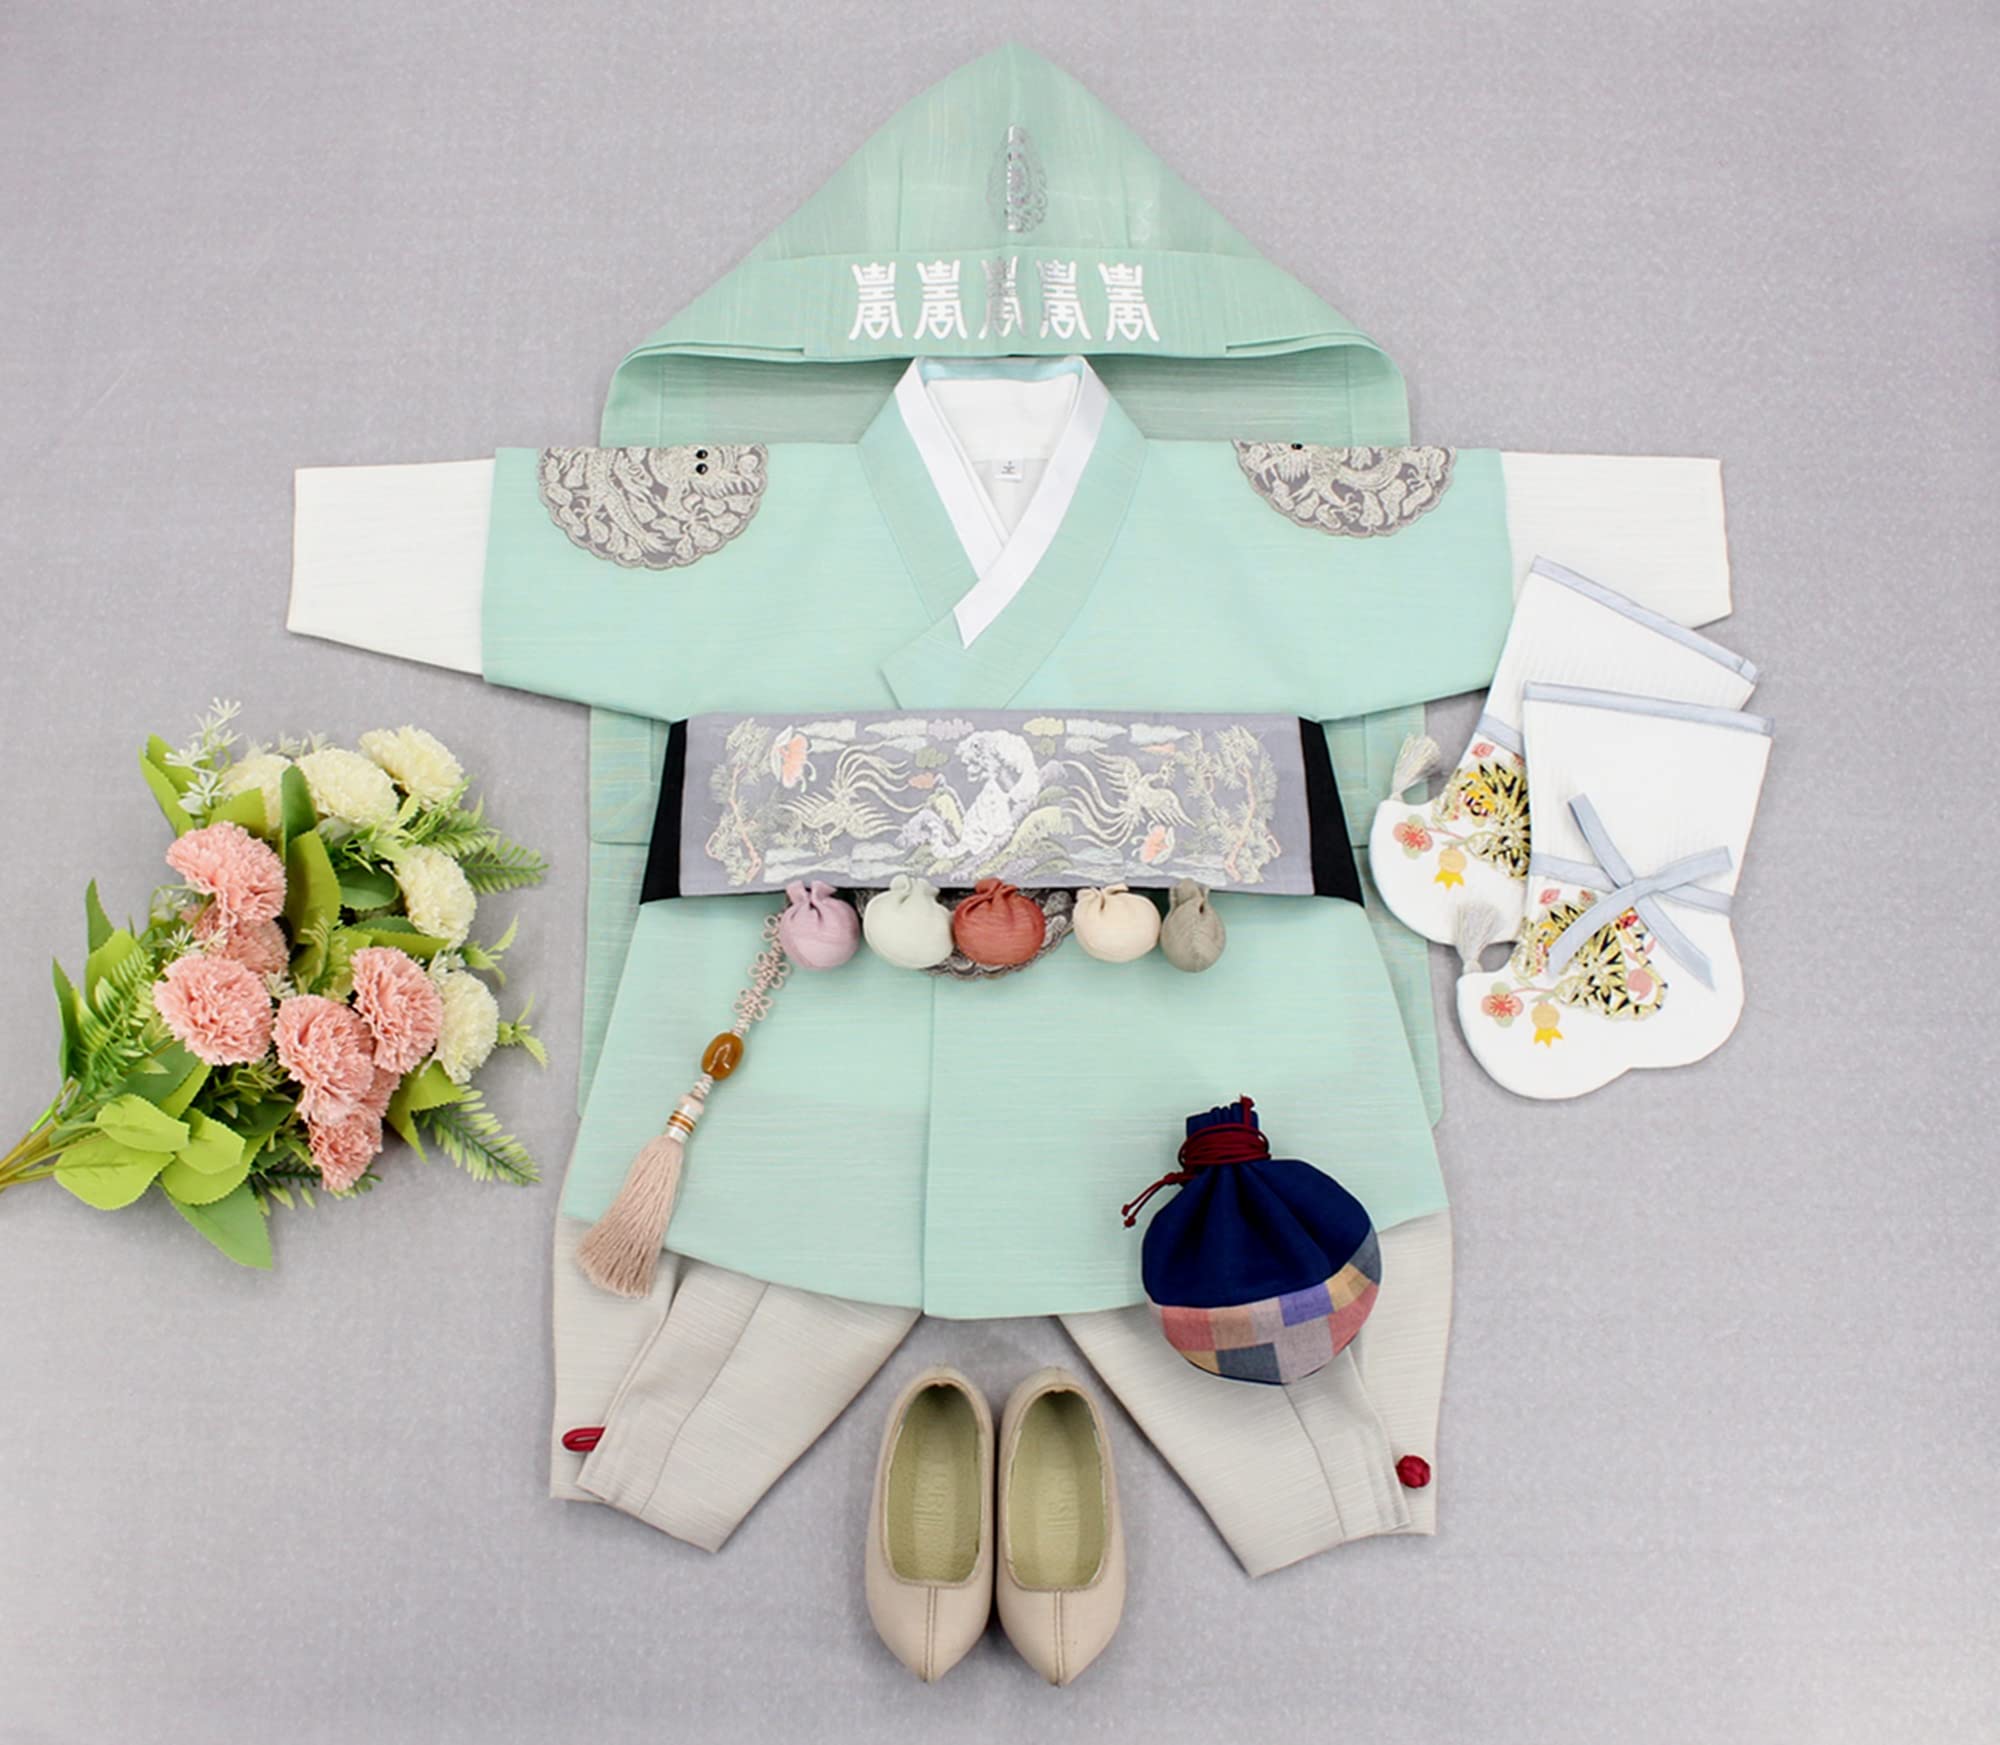 Korean Hanbok Boy Baby Traditional Kings Design Clothing Set Mint 100th days to 8 ages ddb002